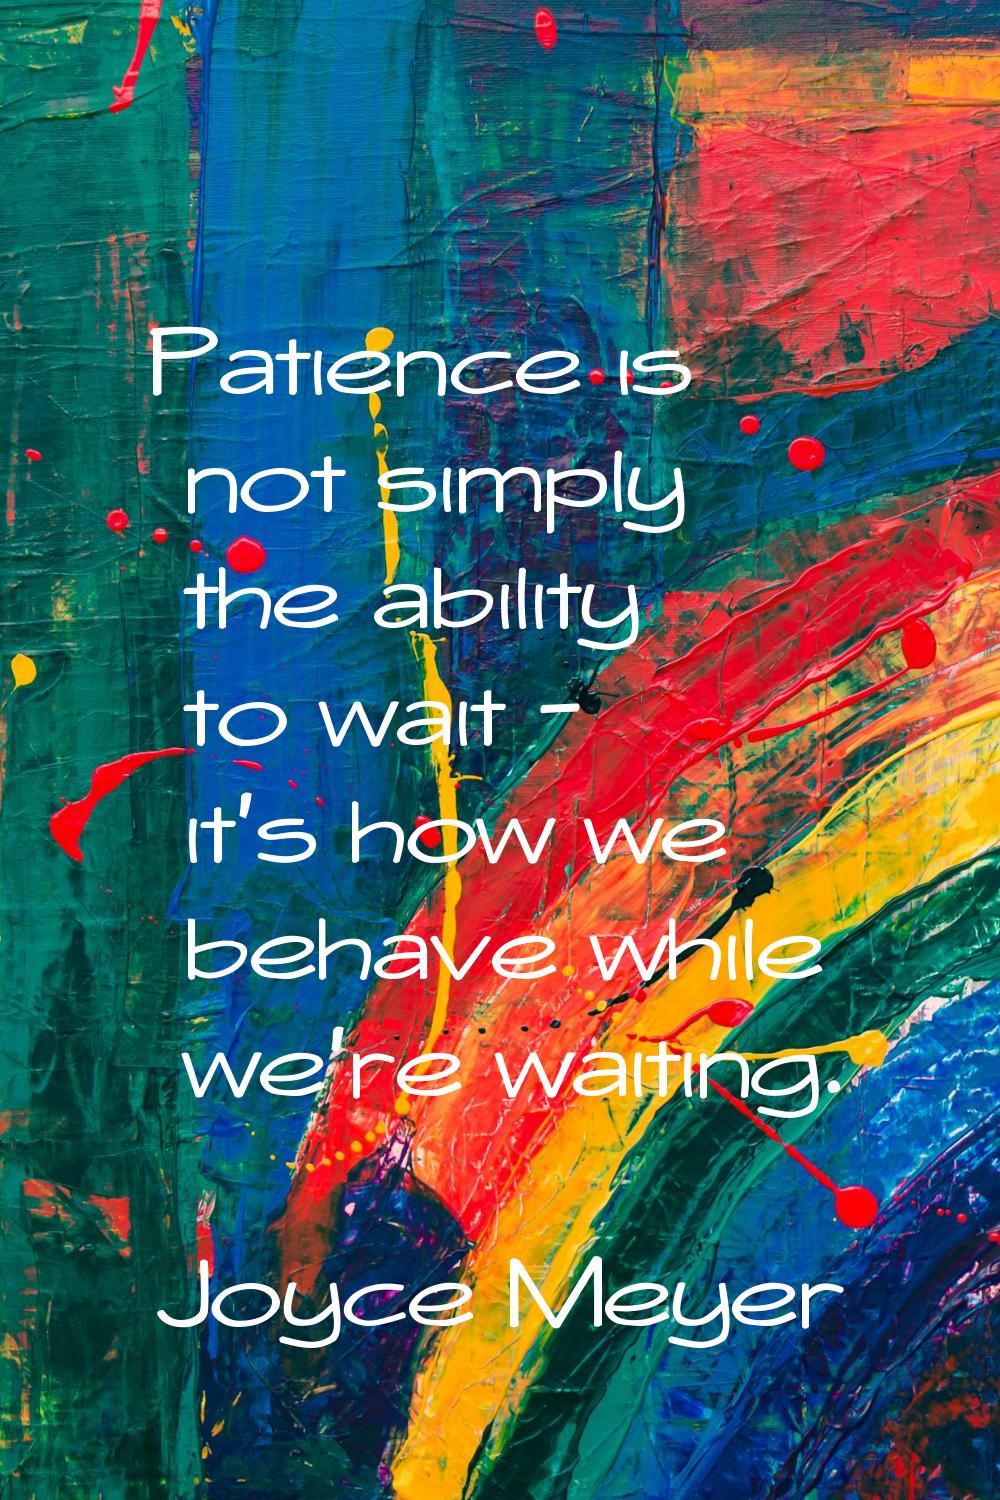 Patience is not simply the ability to wait - it's how we behave while we're waiting.